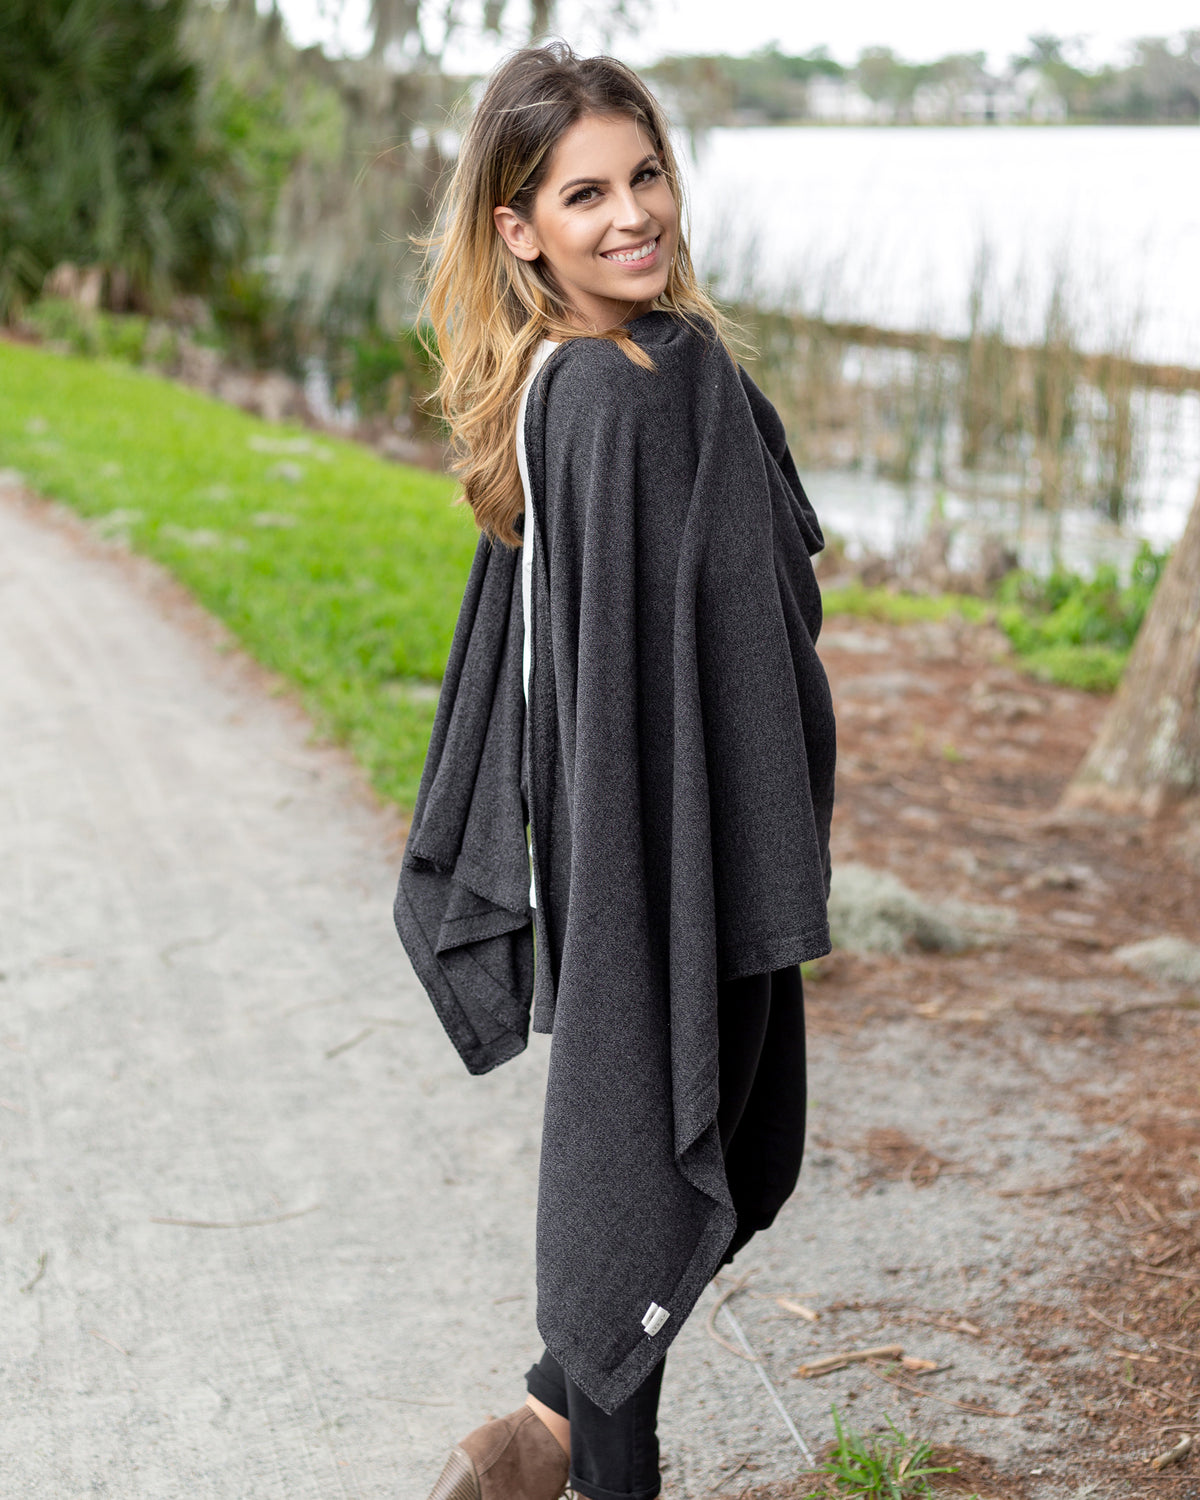 Woman wearing the Dreamsoft Travel Scarf in Graphite which is a gray scarf, worn as a blanket over the front of her body while standing on the side of a road